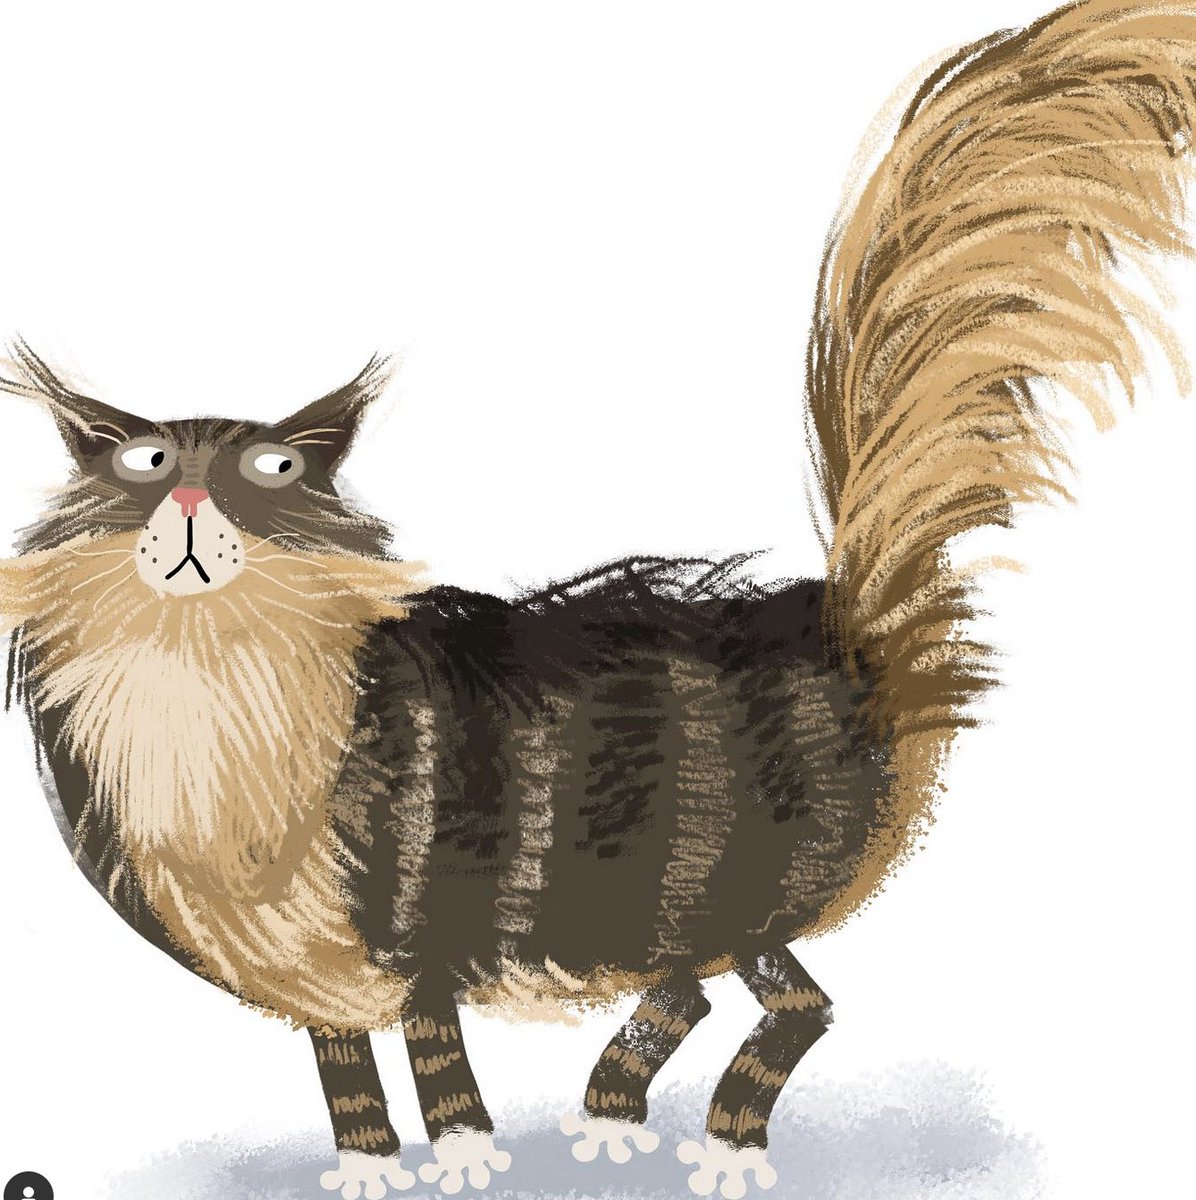 Repost from Asa Gilland (@asagilland): 'This is Nilsson. I used him as a model for “Welcome to Maine” published by Doubleday Books (@doubledaybooks) in 2021, which of course had to include a Maine coon cat. 😺😽 #asagilland #lillarogersstudio #lillarogers #art #illustration #a